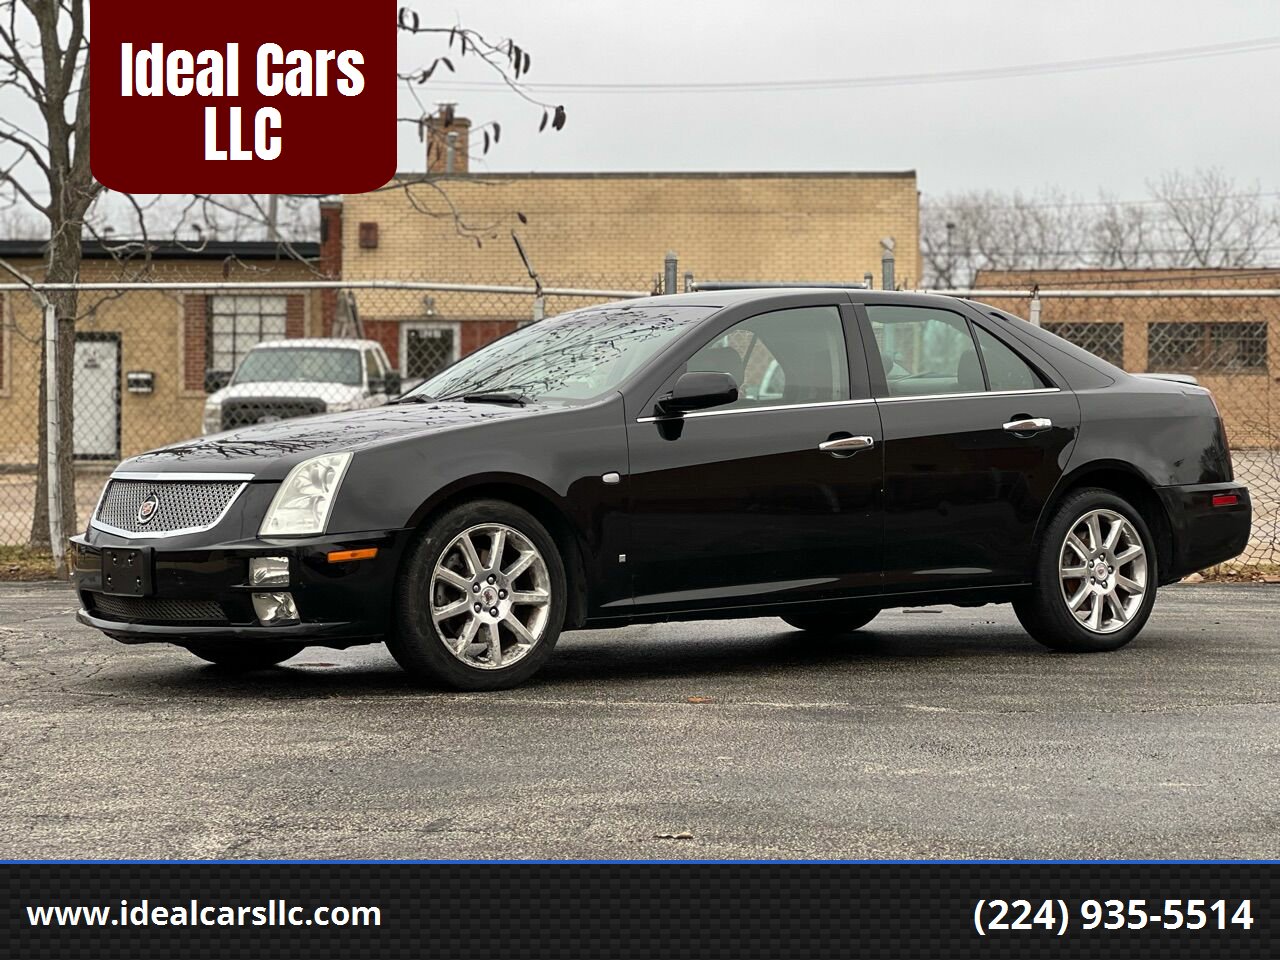 2007 Cadillac STS For Sale - Carsforsale.com®